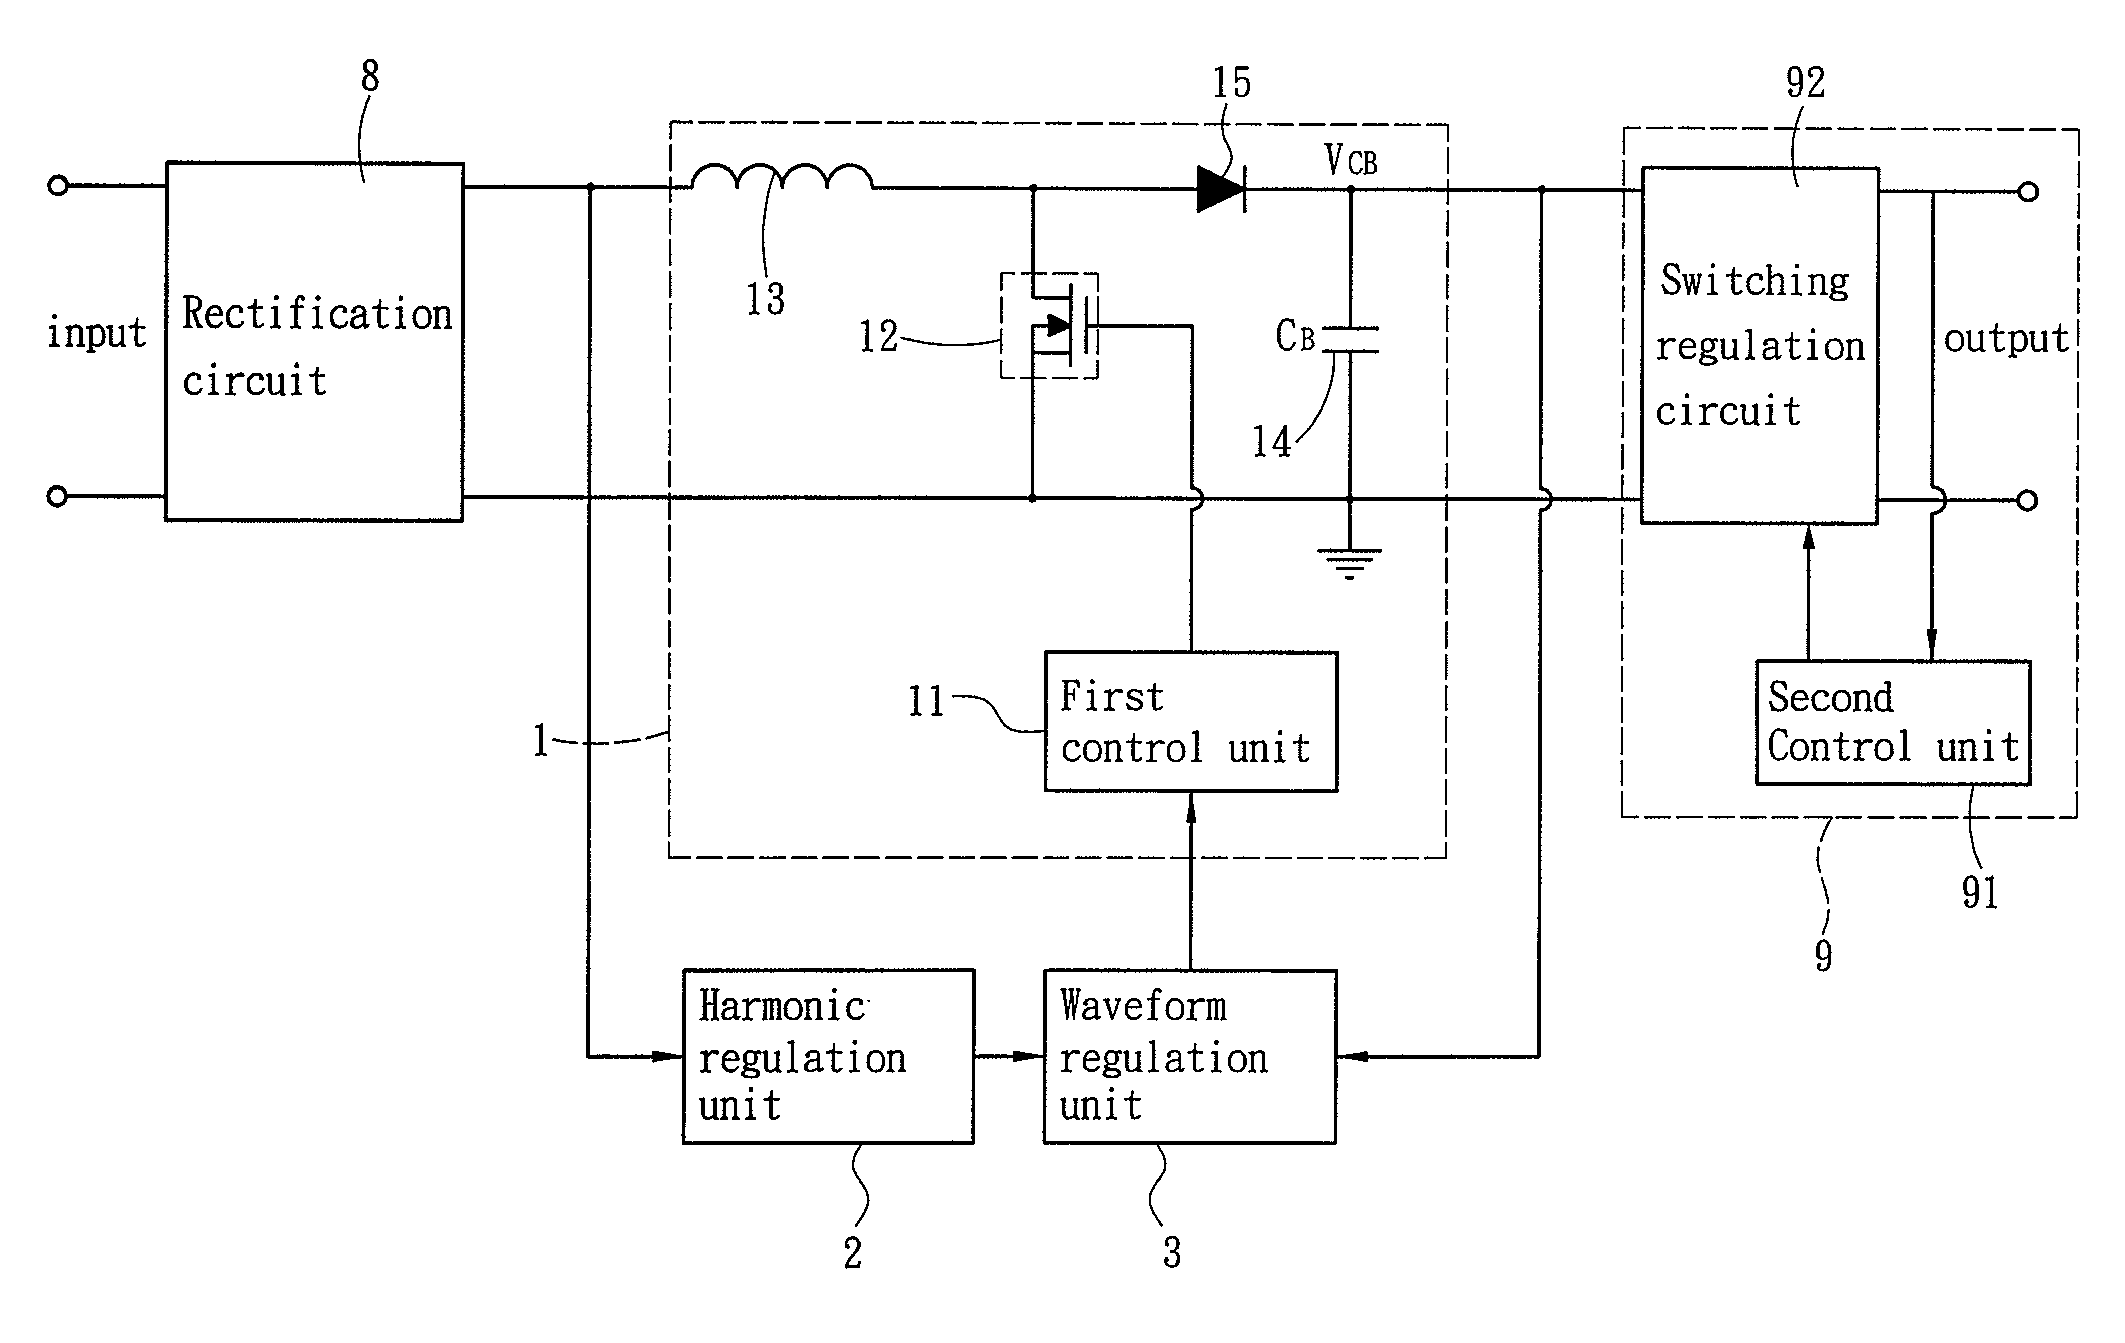 Means of eliminating electrolytic capacitor as the energy storage component in the single phase ad/dc two-stage converter